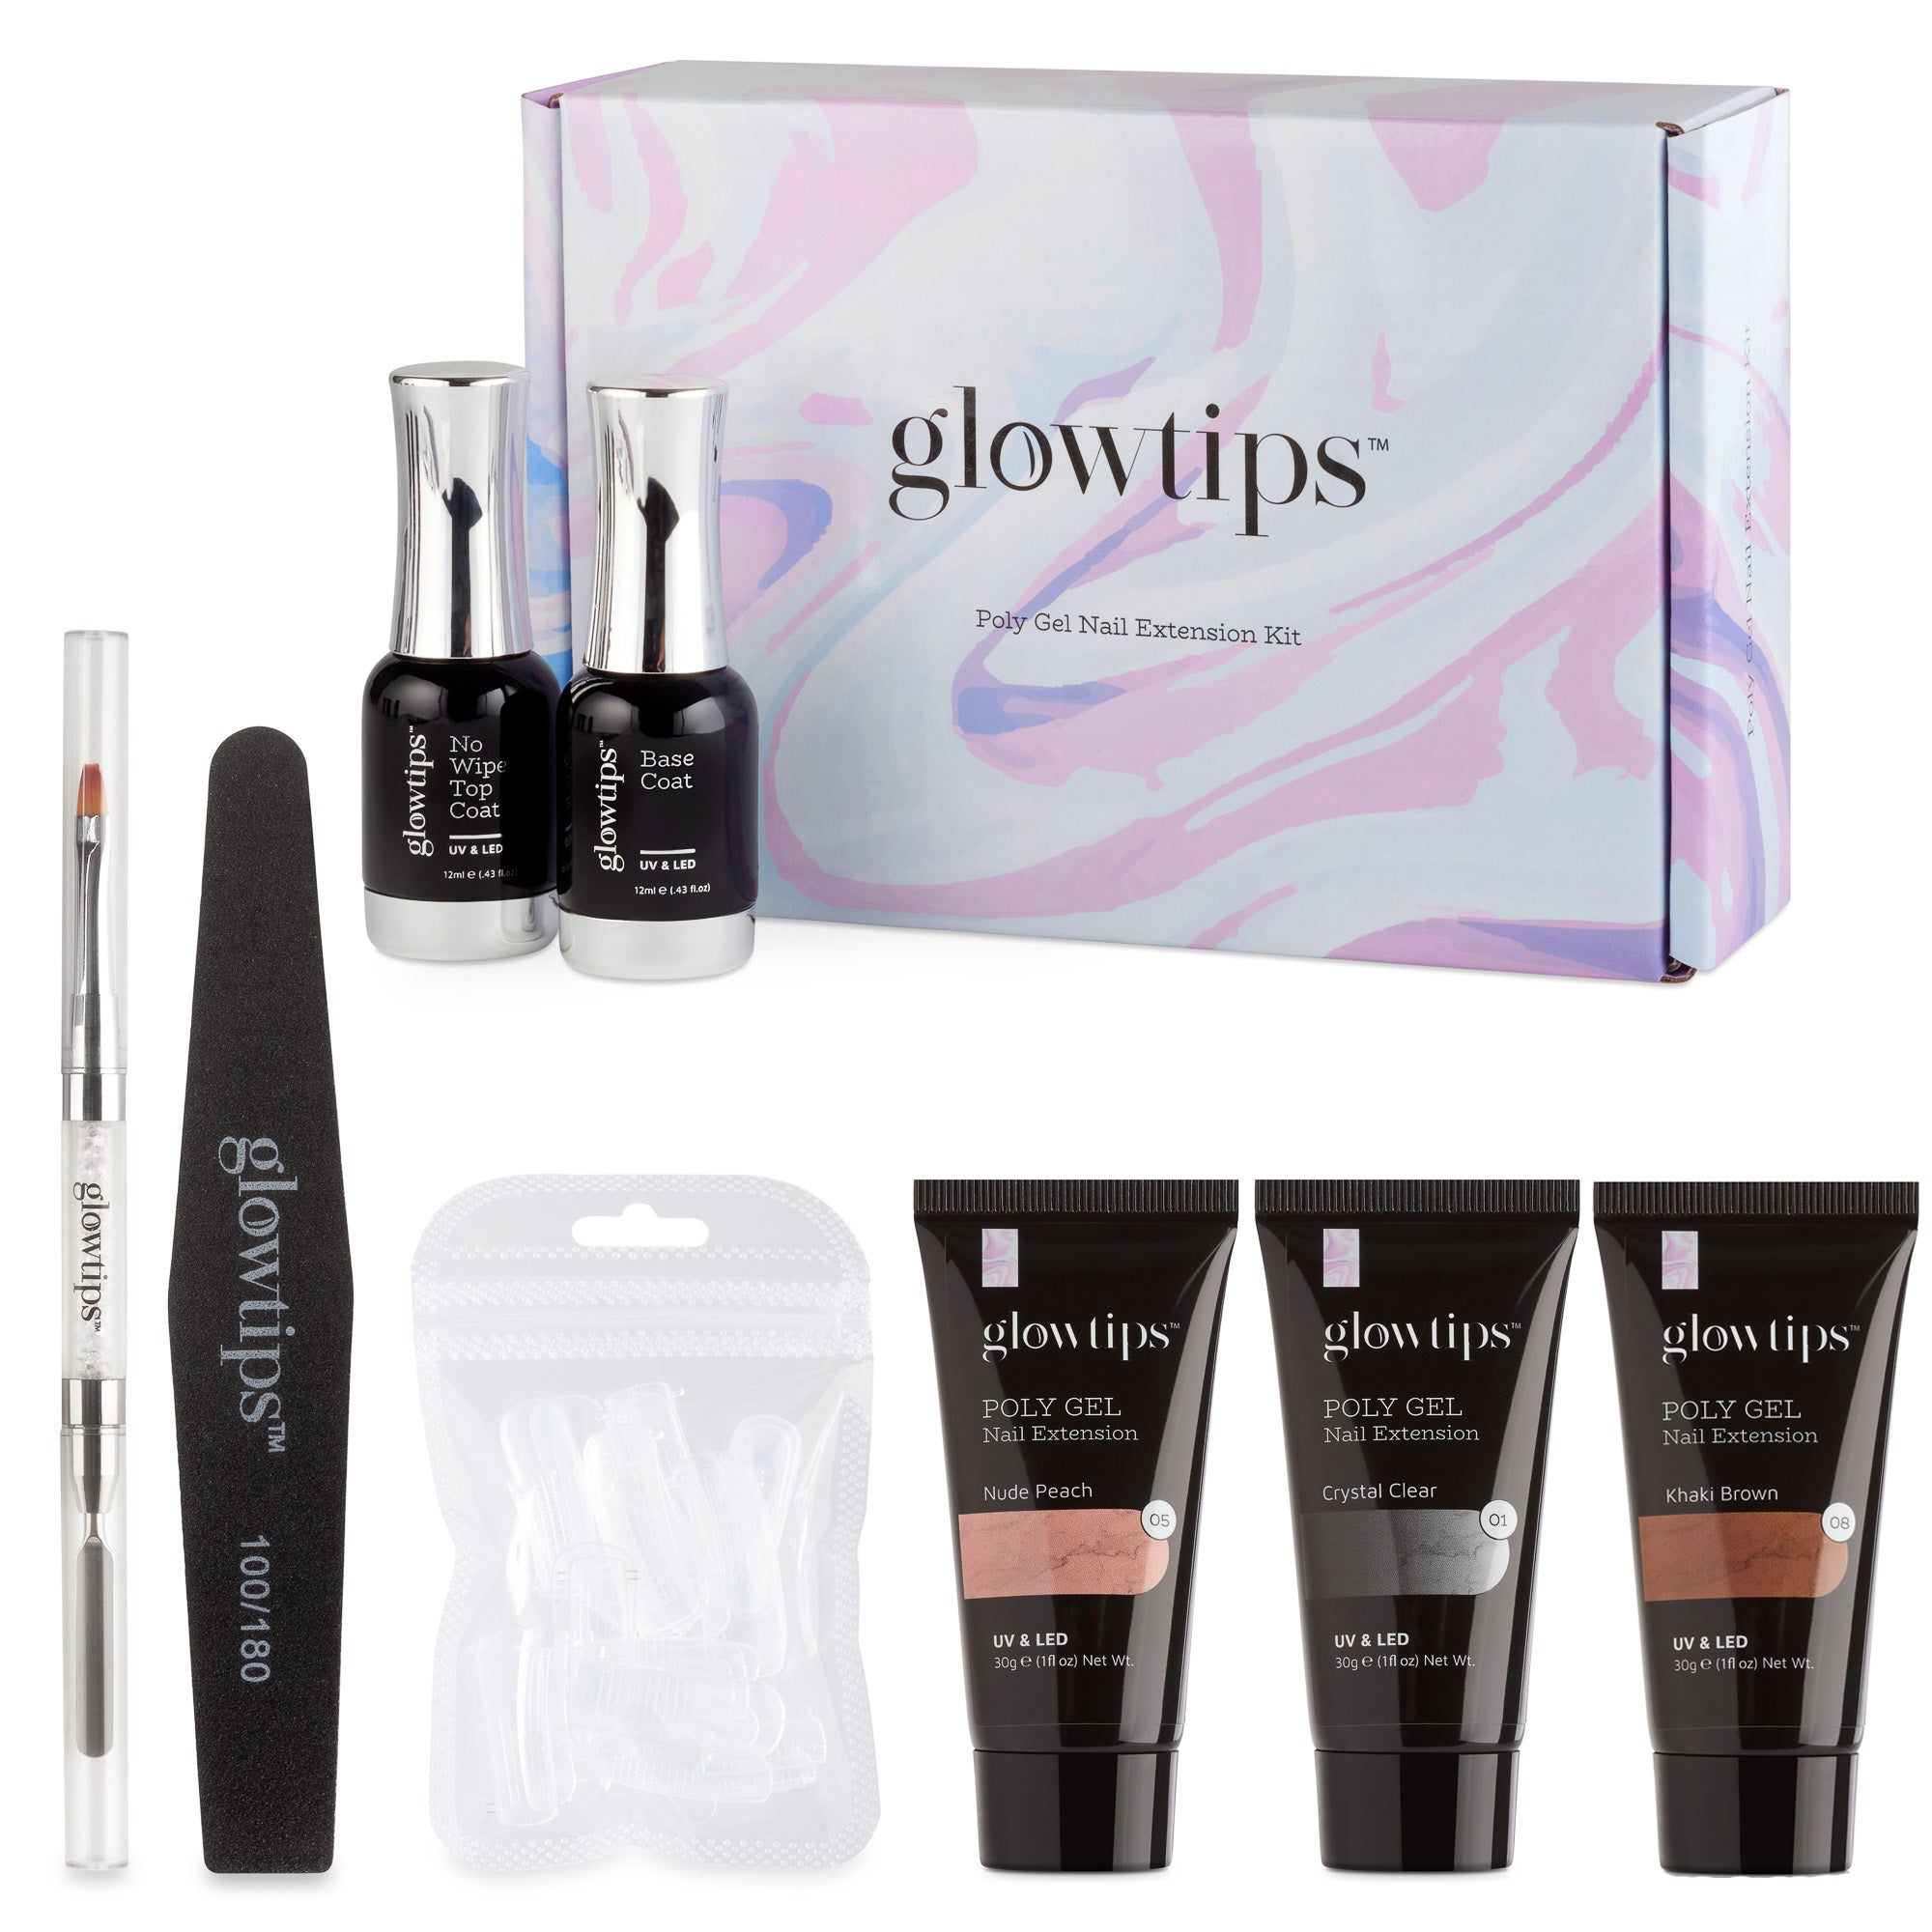 [NON-UK] Glowtips Poly Nail Gel Extension Starter Kit - WITHOUT SLIP SOLUTION